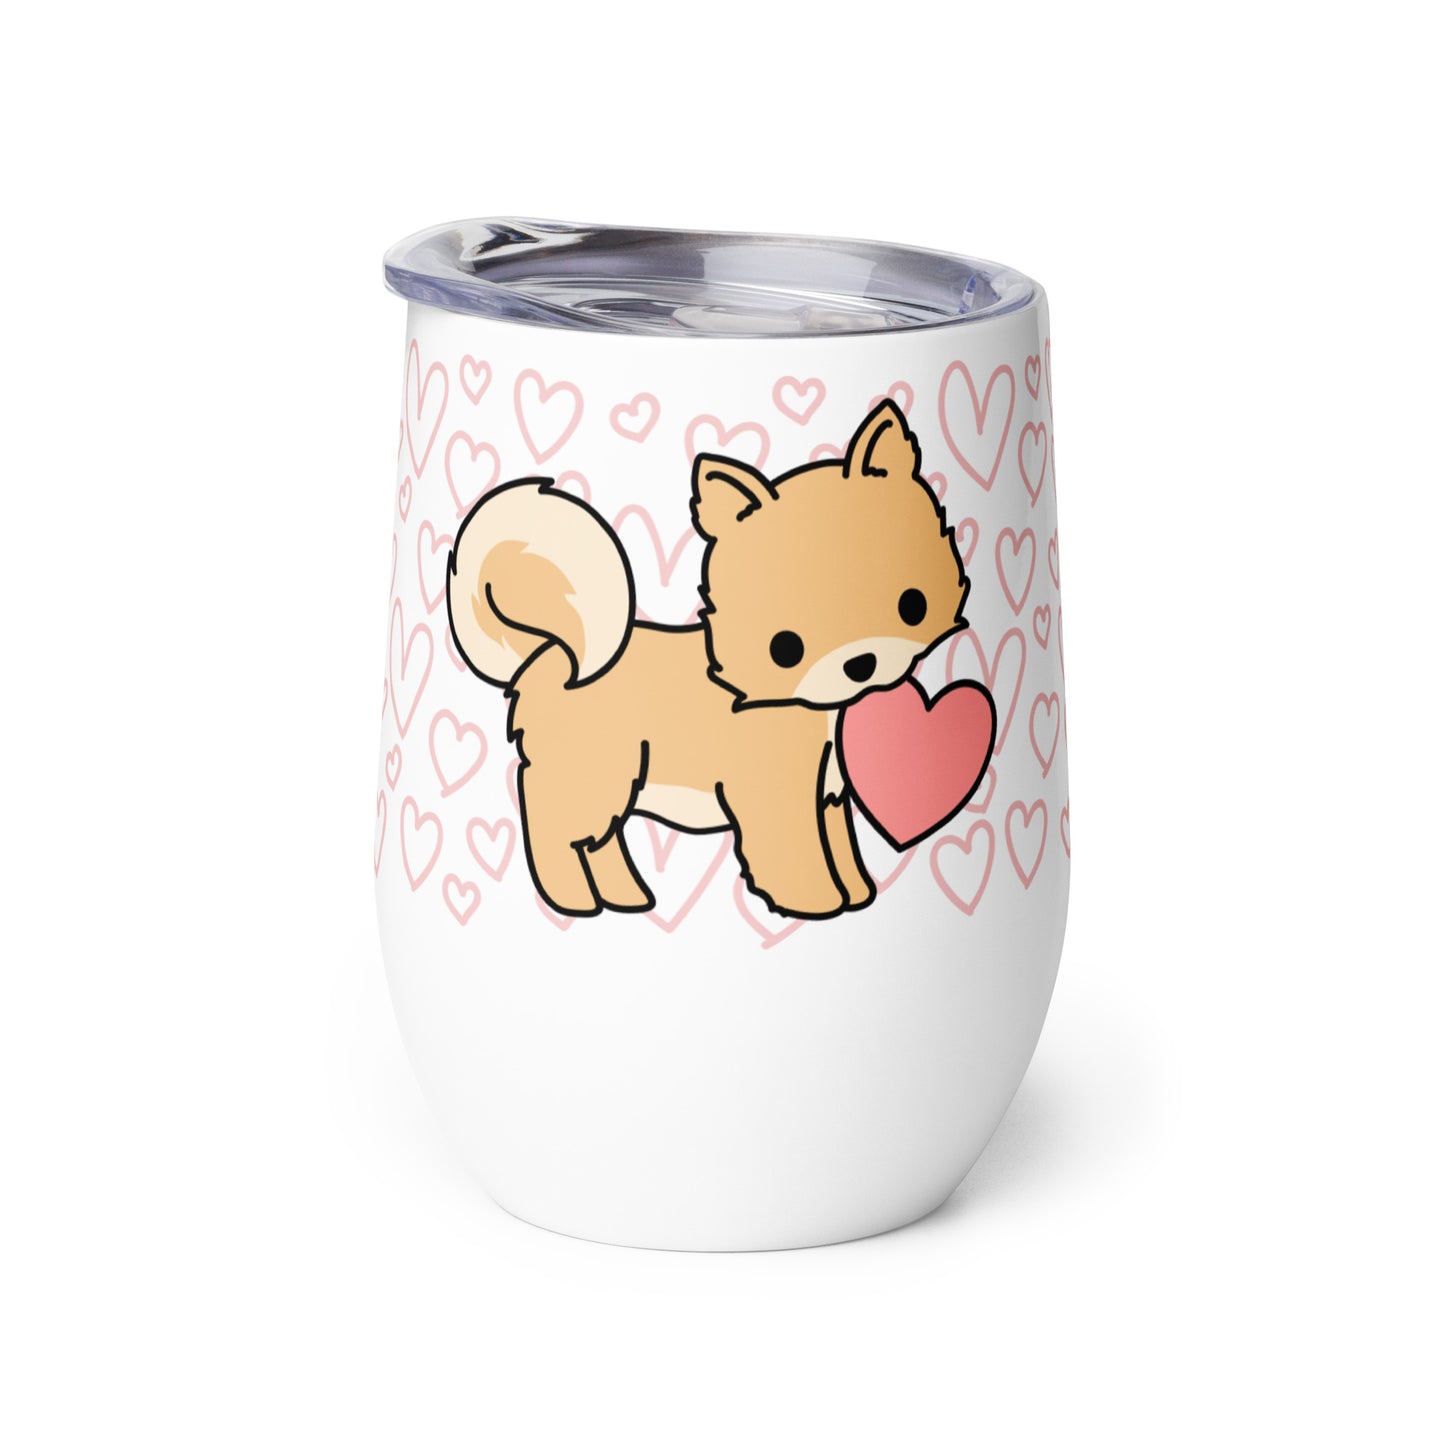 A white metal wine tumbler with a plastic lid. A pattern of hearts wraps around the top half of the tumbler. Centered on the tumbler is a cute, stylized illustration of a Pomeranian.